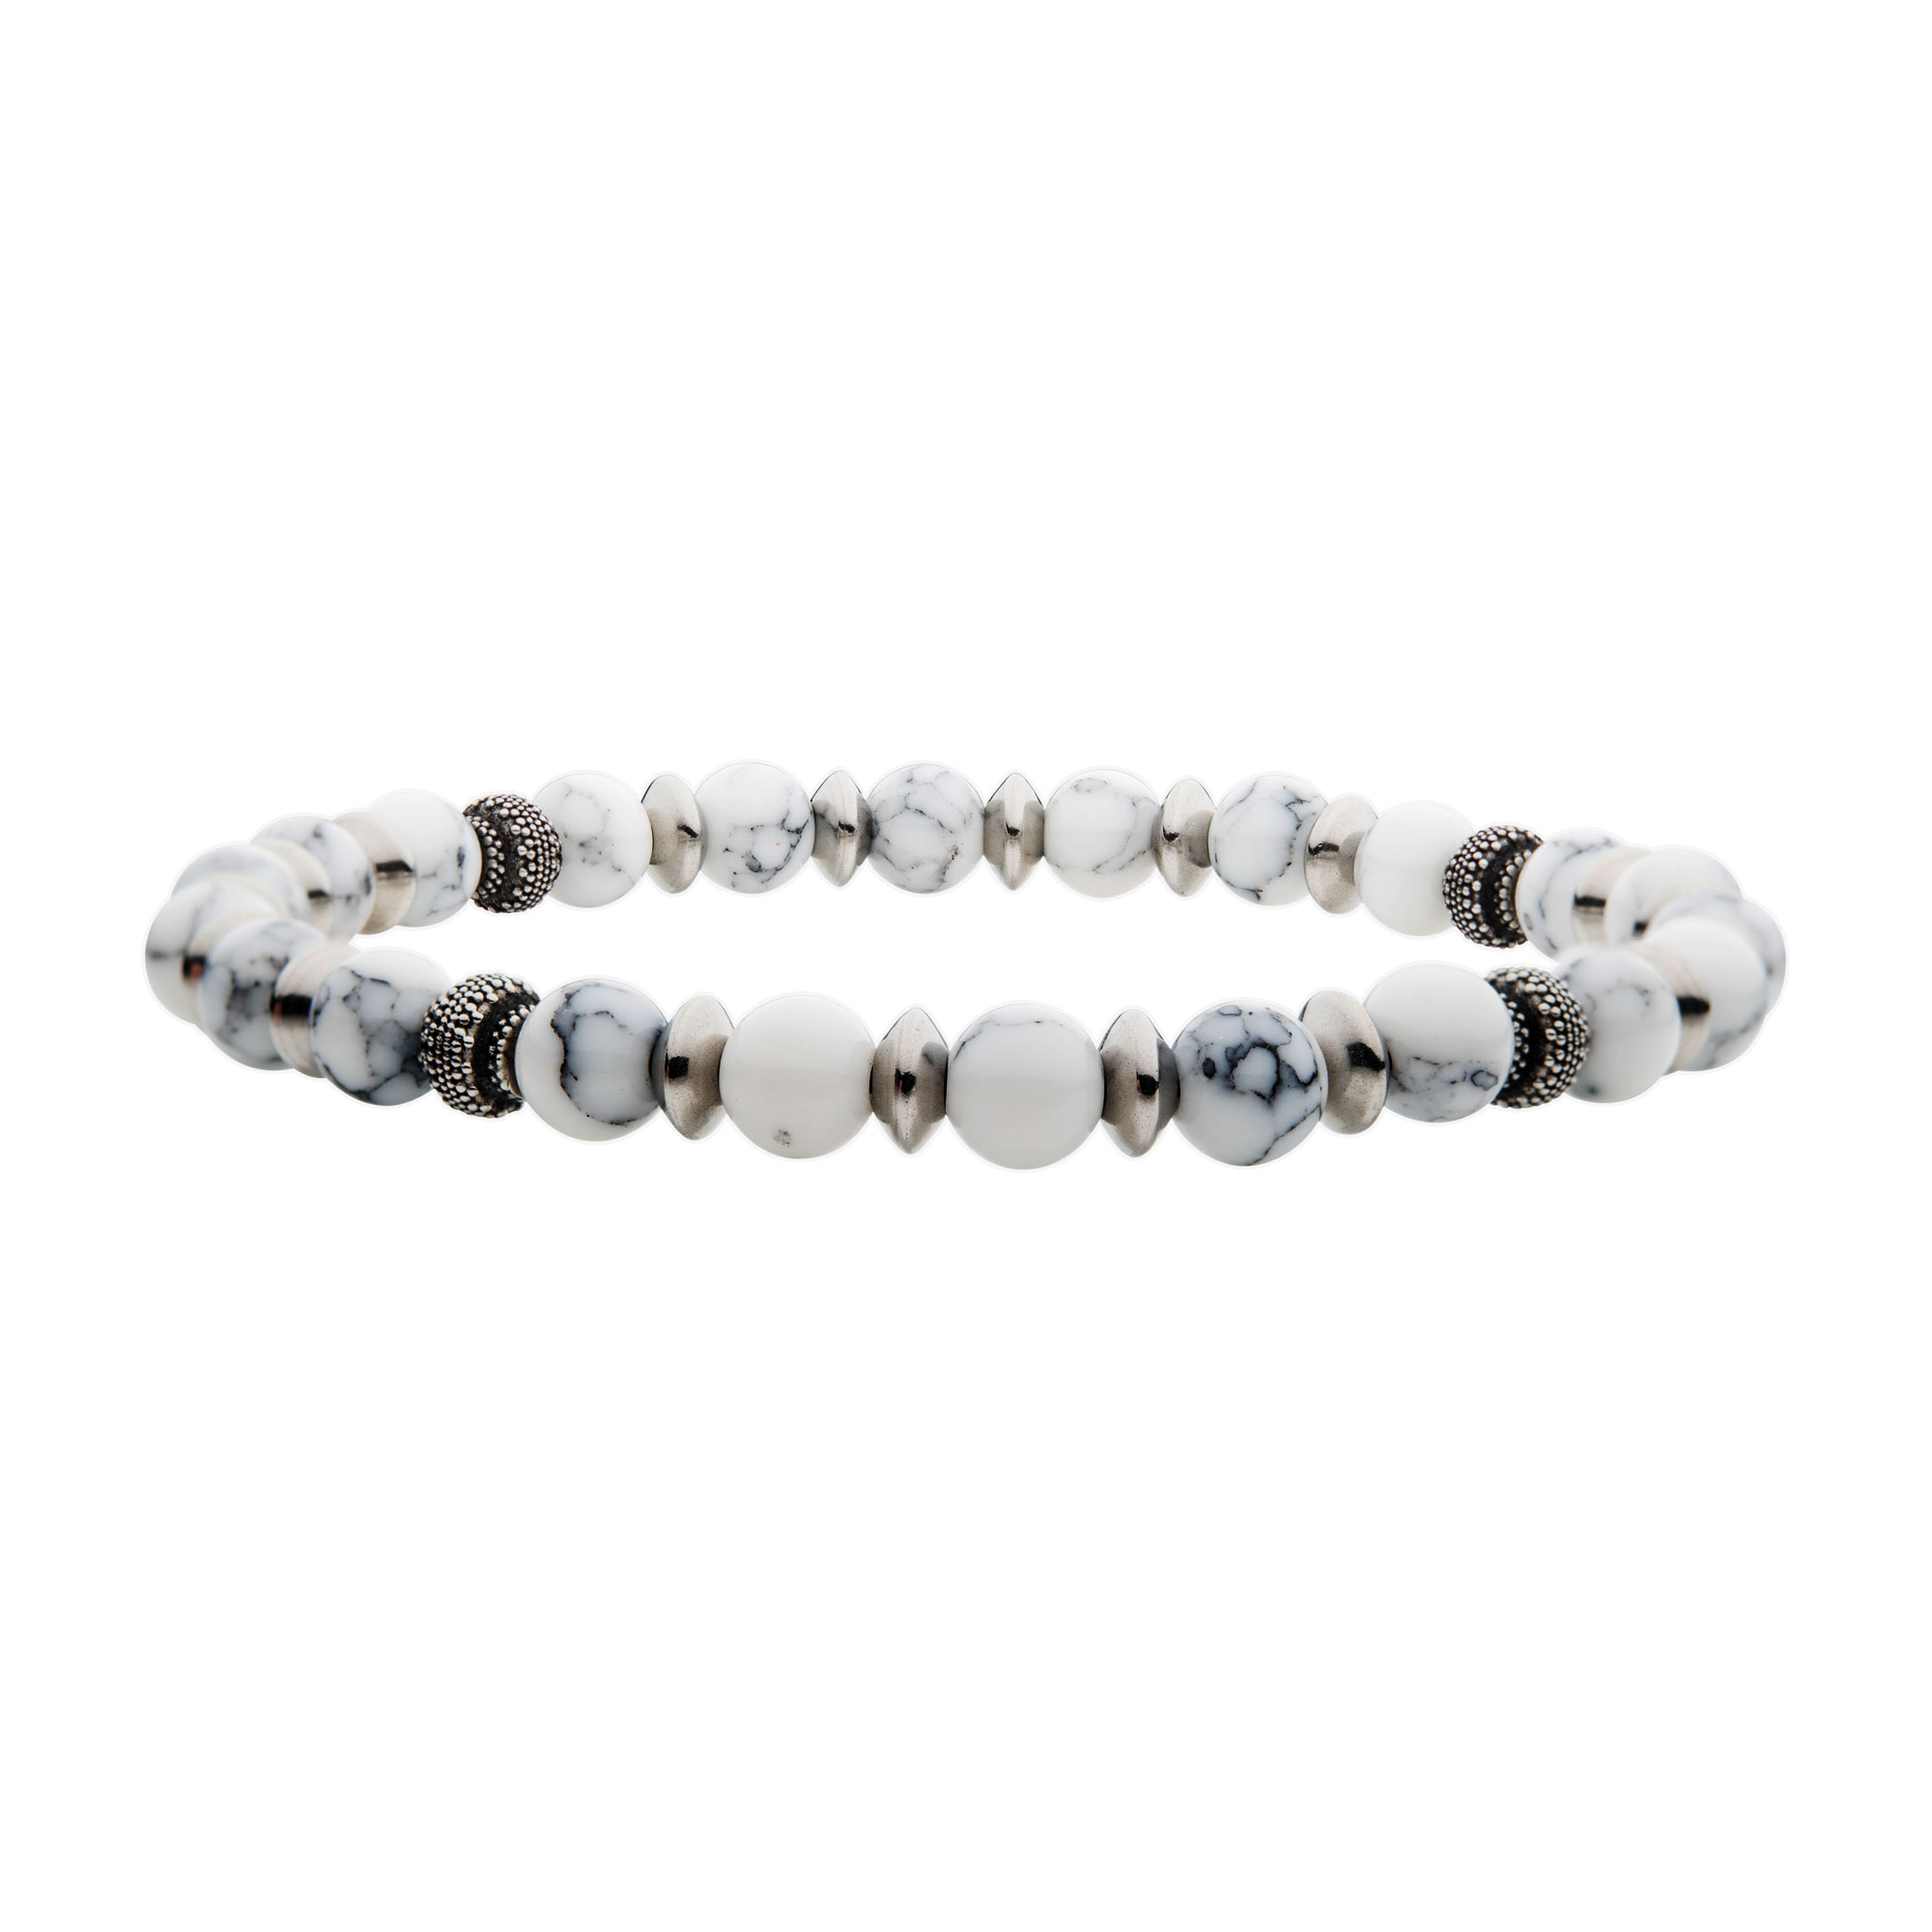 White Howlite Stones with Black Oxidized Beads Bracelet Mueller Jewelers Chisago City, MN